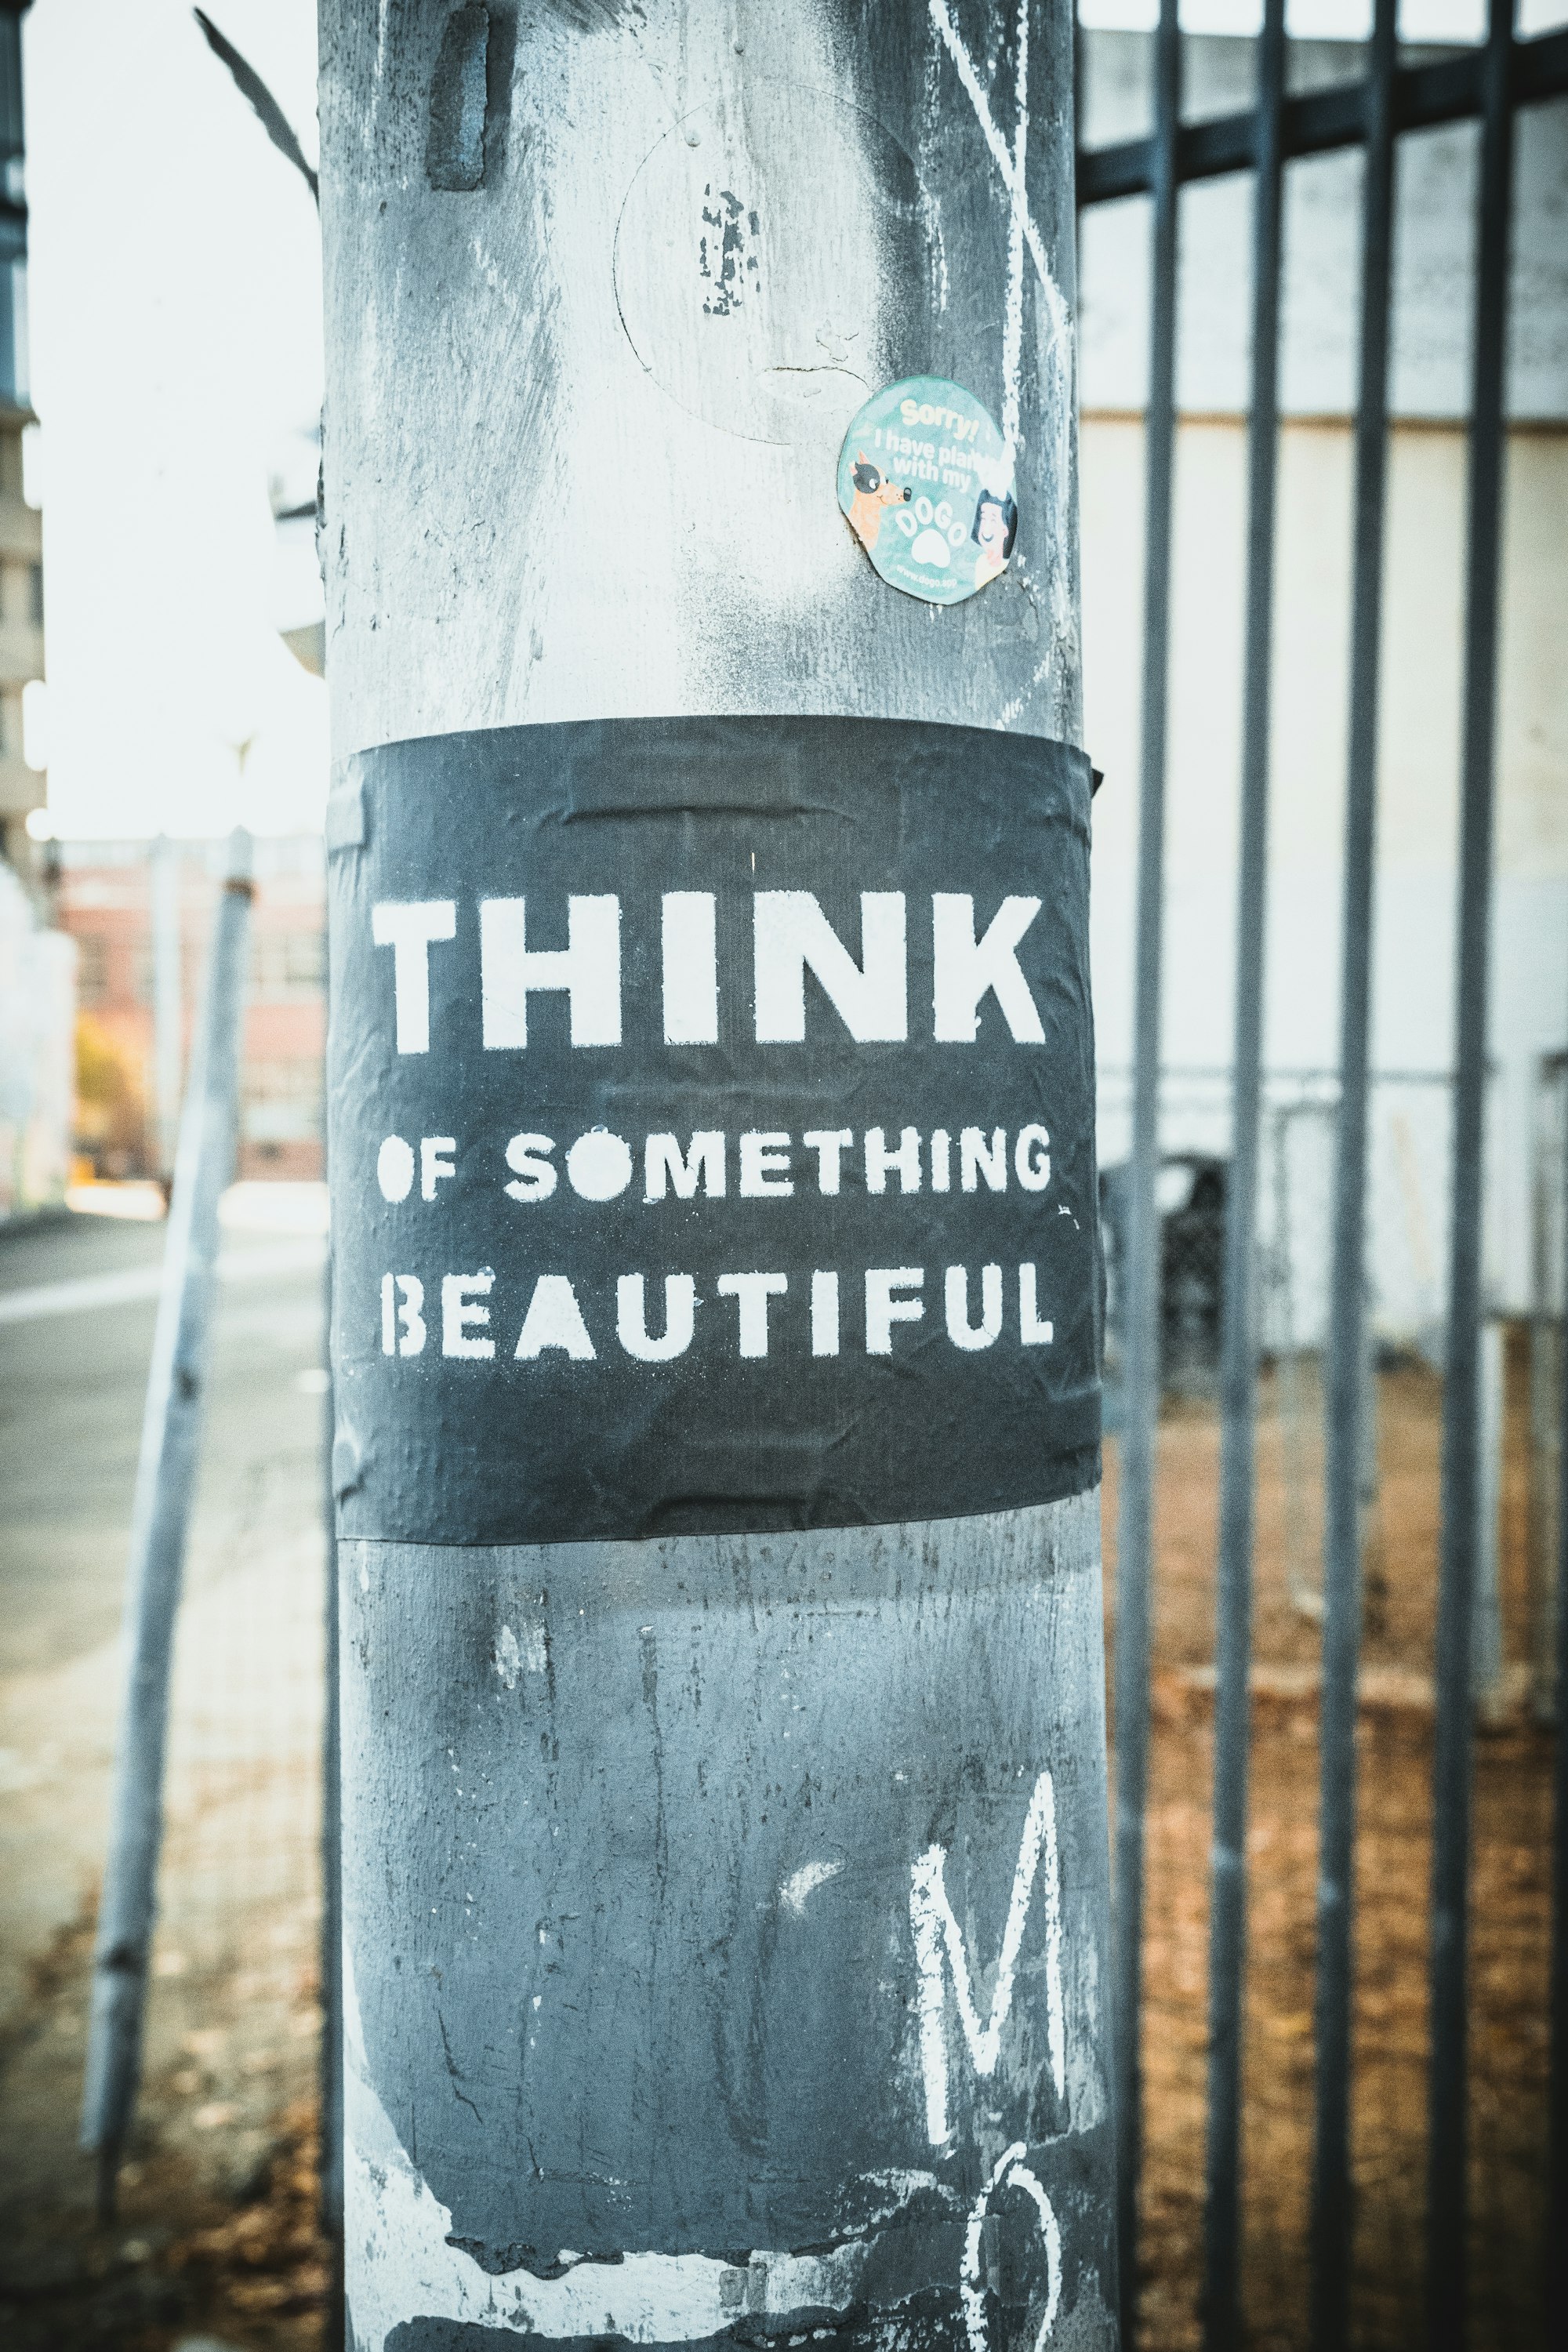 "Think of Something Beautiful" sign found in Downtown, Los Angeles. Photo by Marty O'Neill of Drastic Graphics.